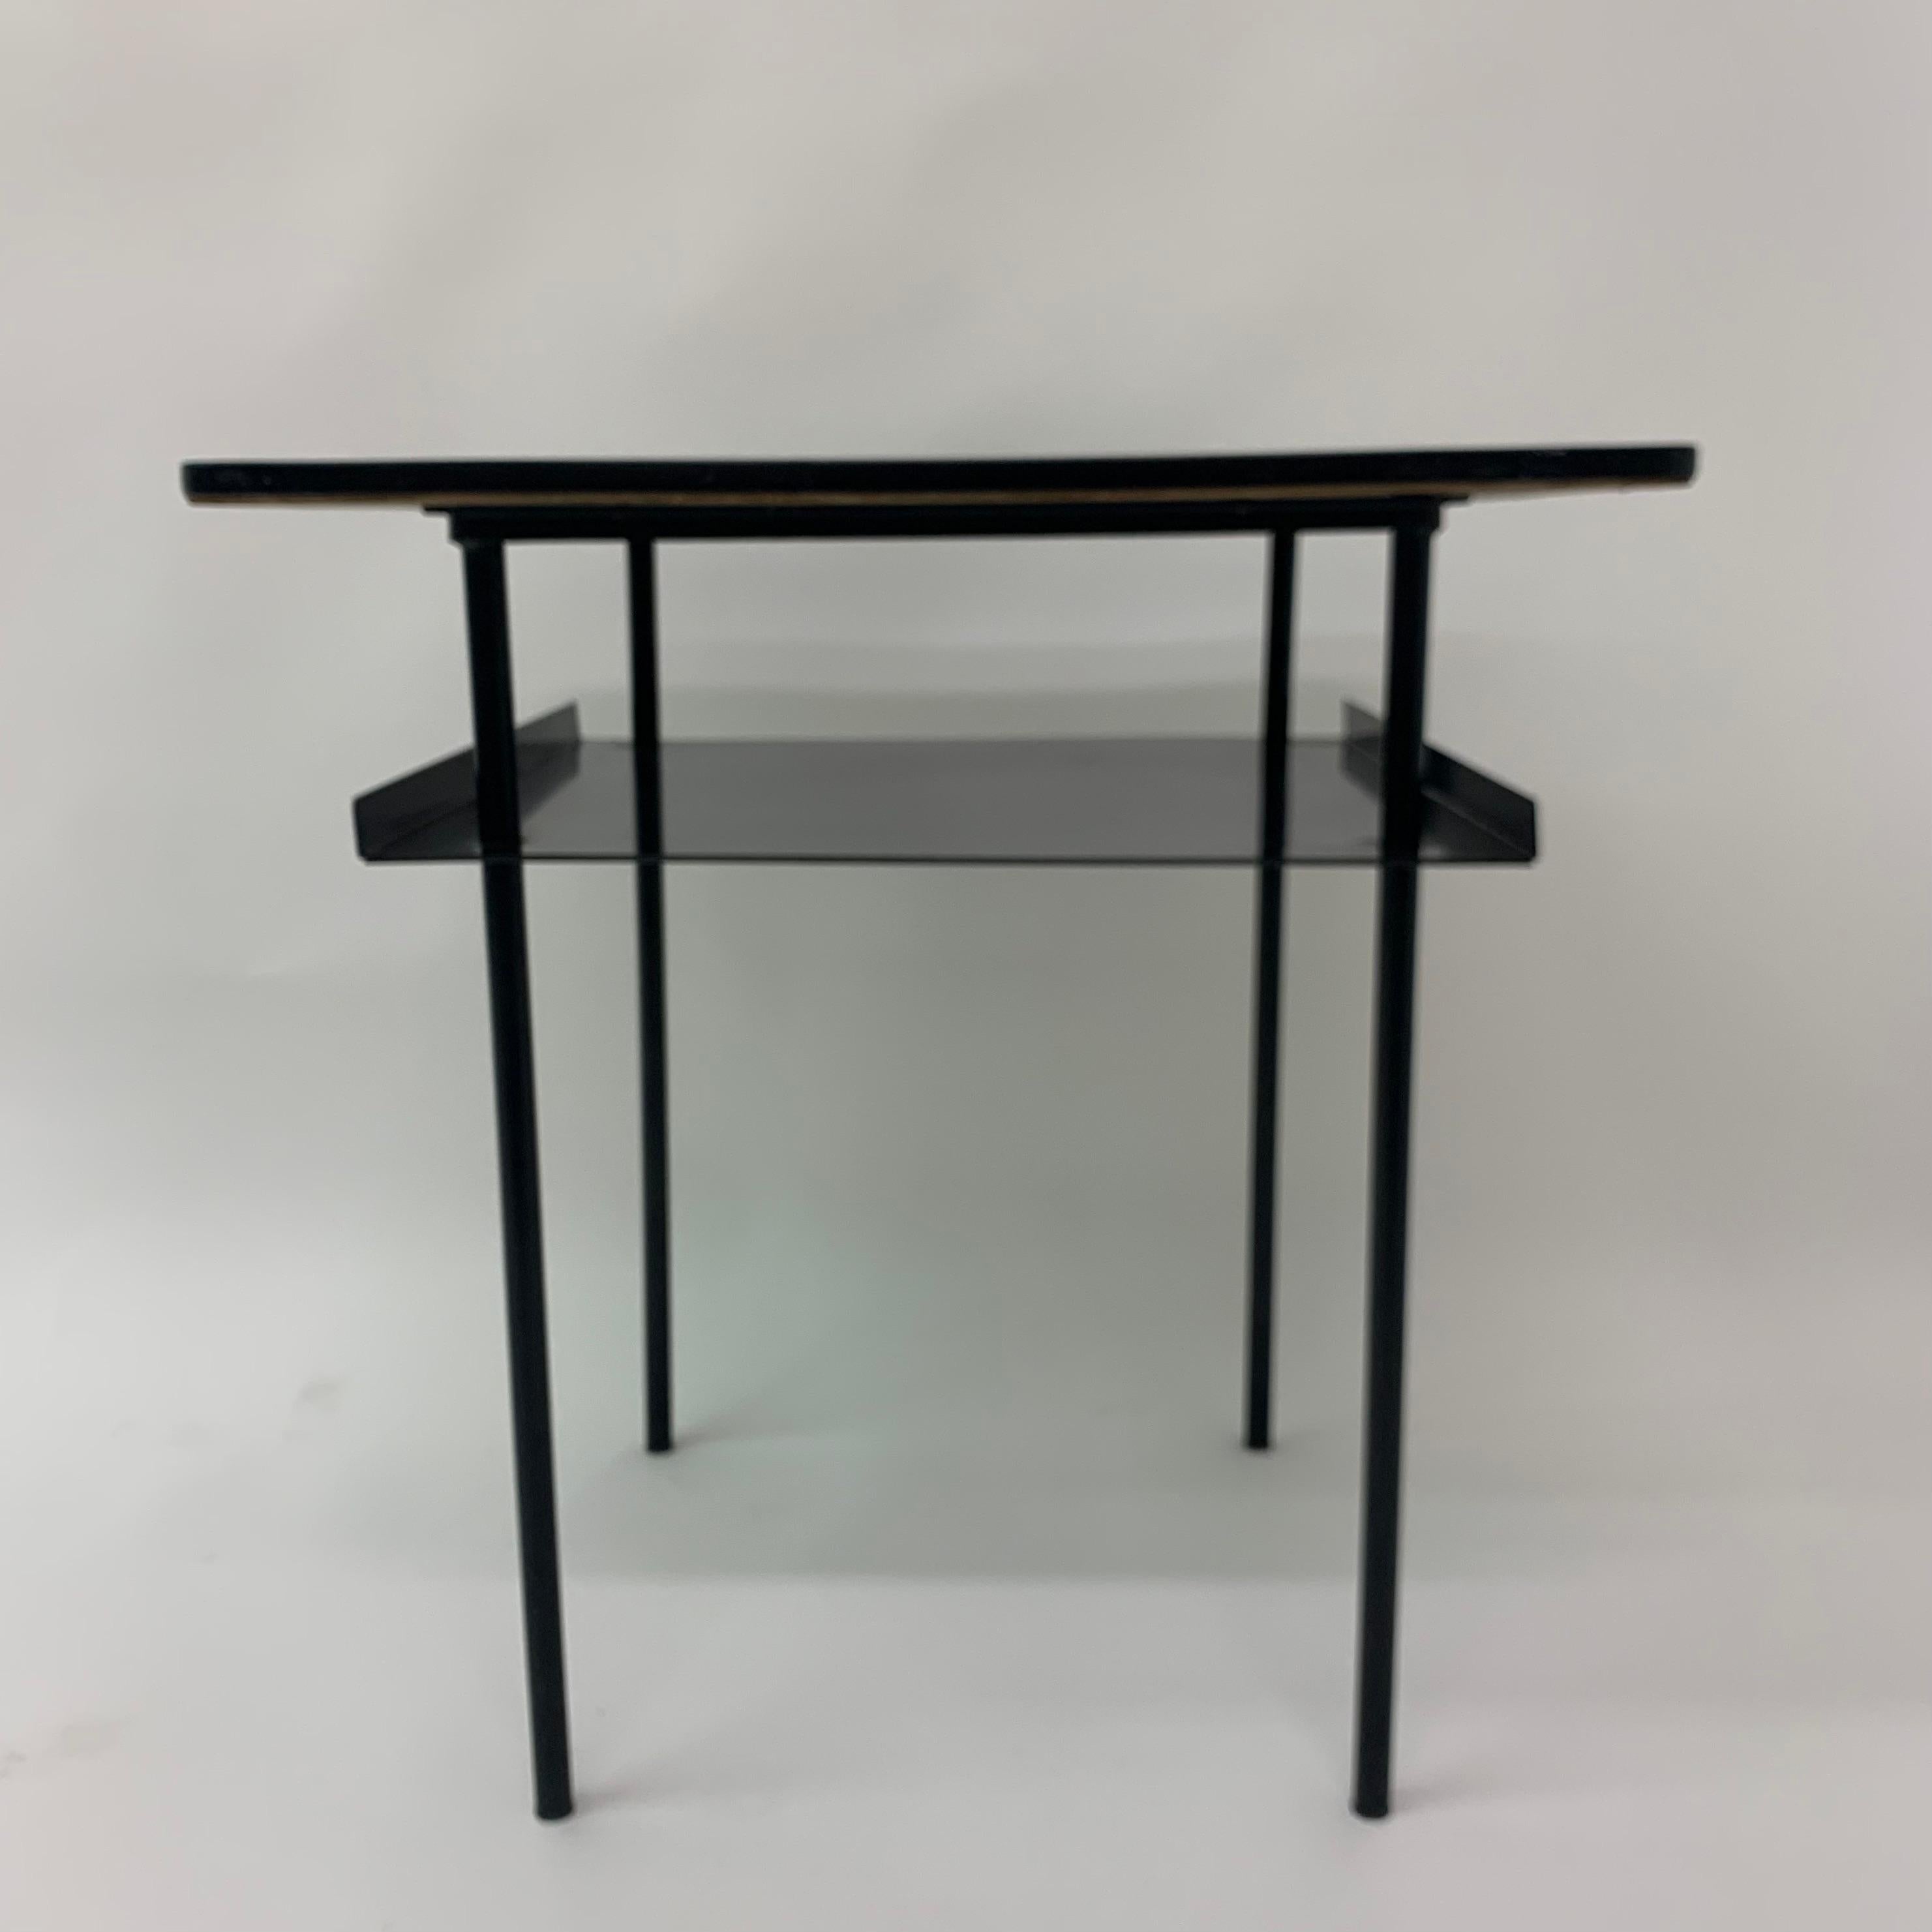 Dutch Mid-Century Modernist Side Table by Wim Rietveld for Auping, 1950s